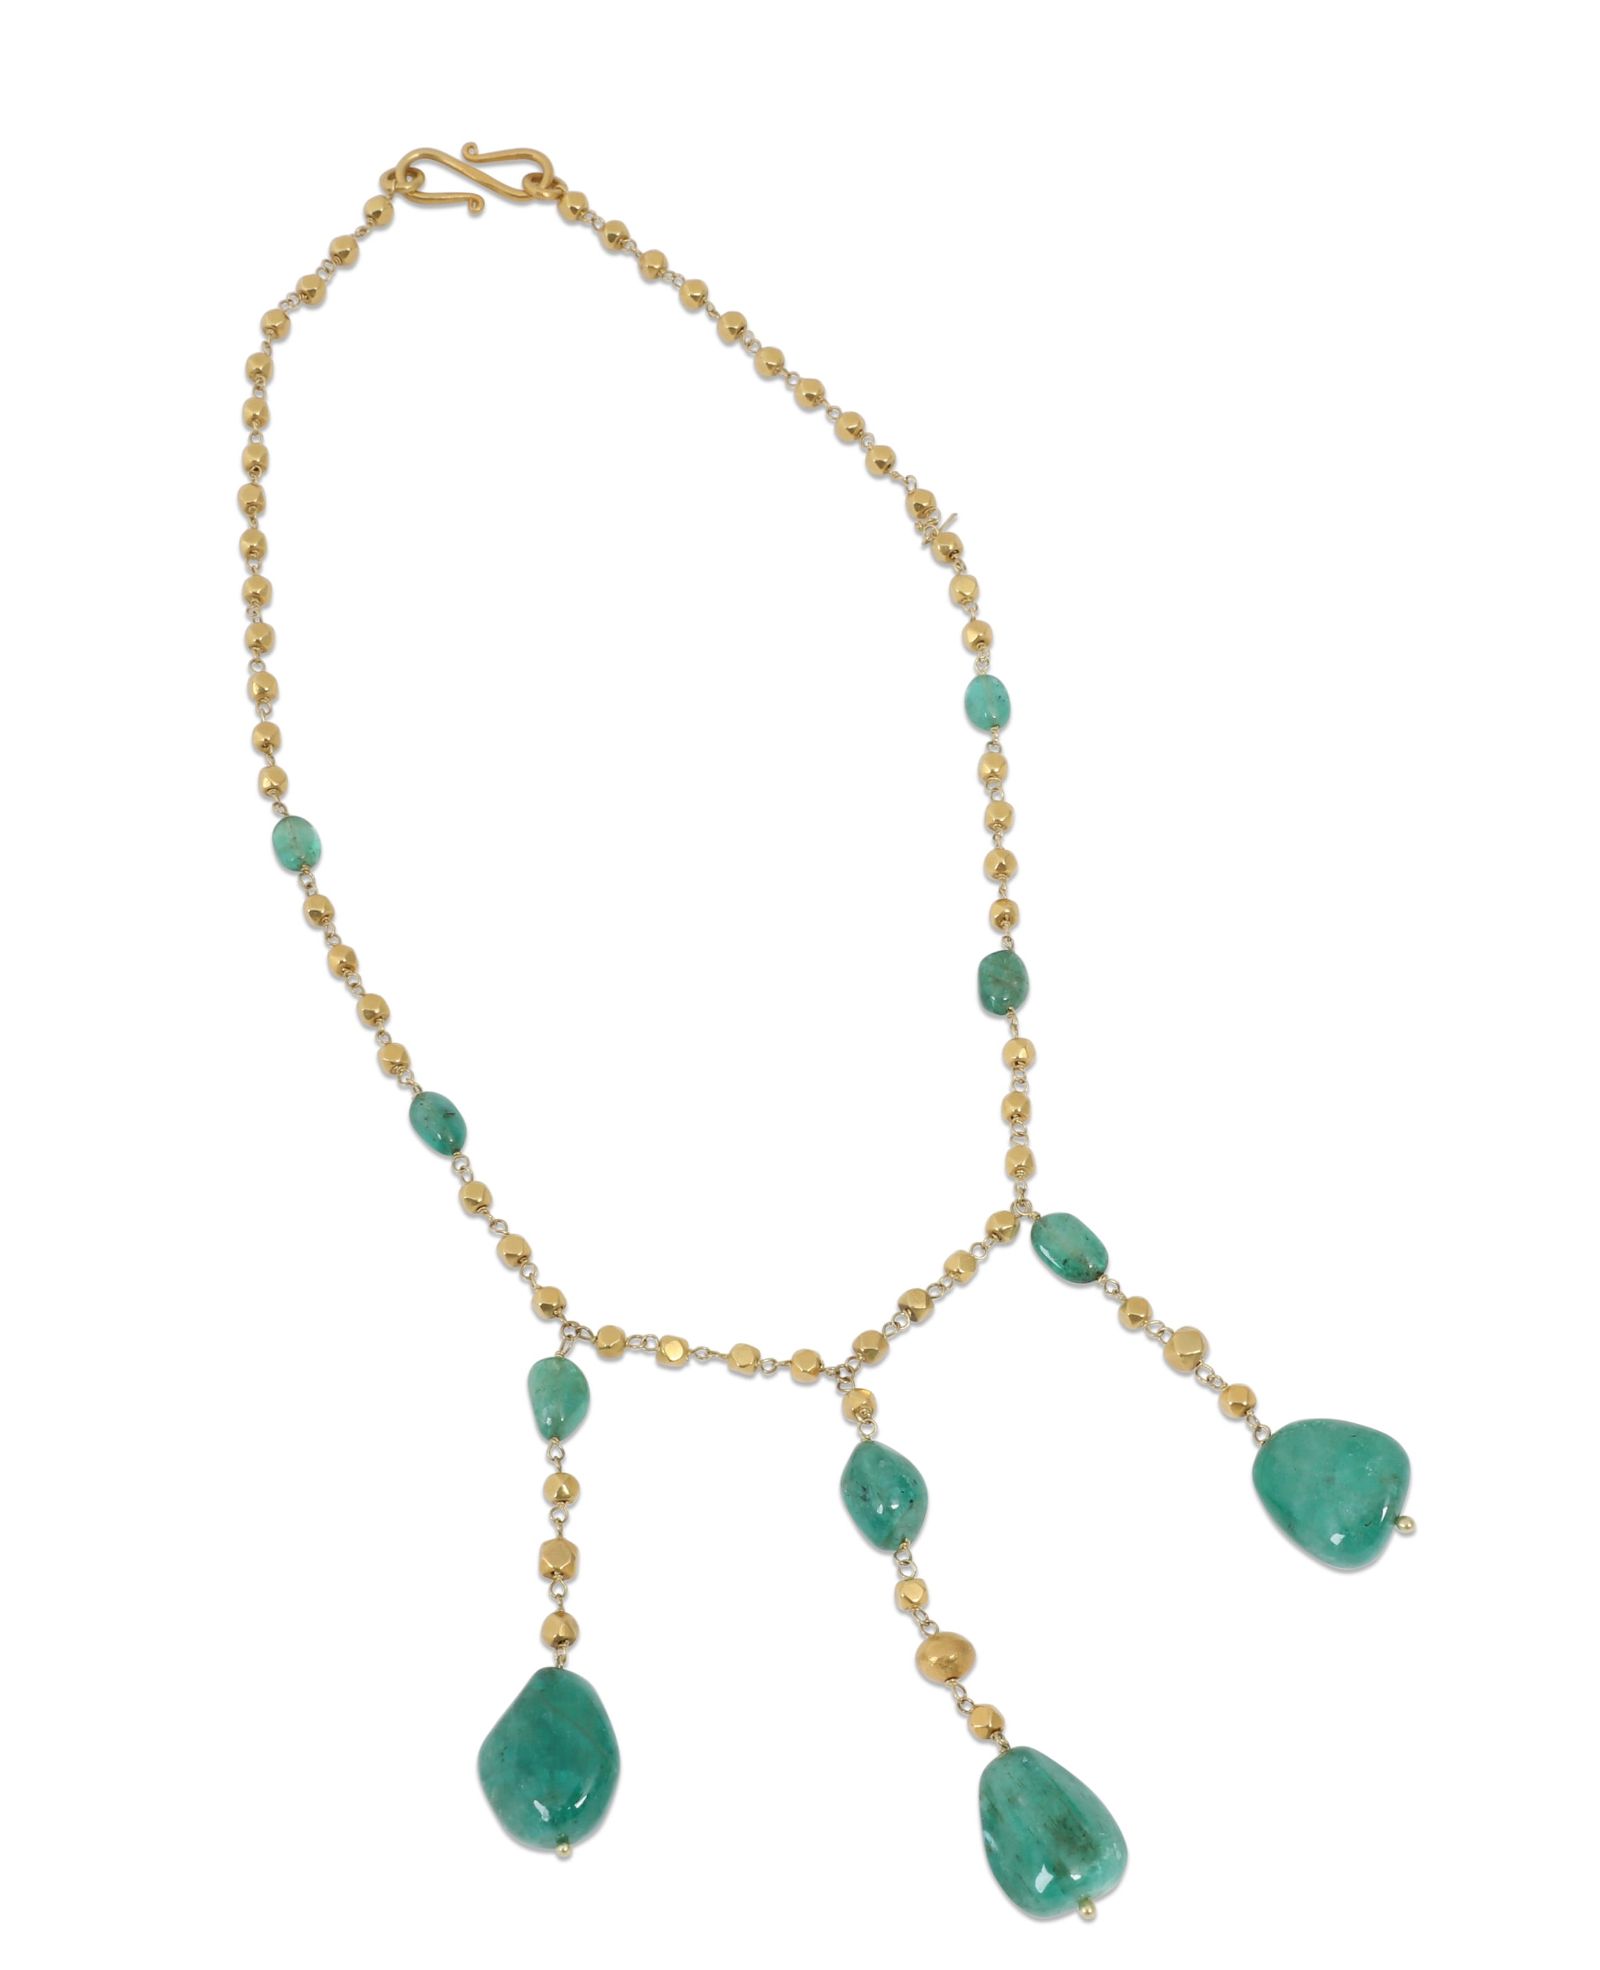 AN EMERALD AND 18K GOLD NECKLACEAn emerald